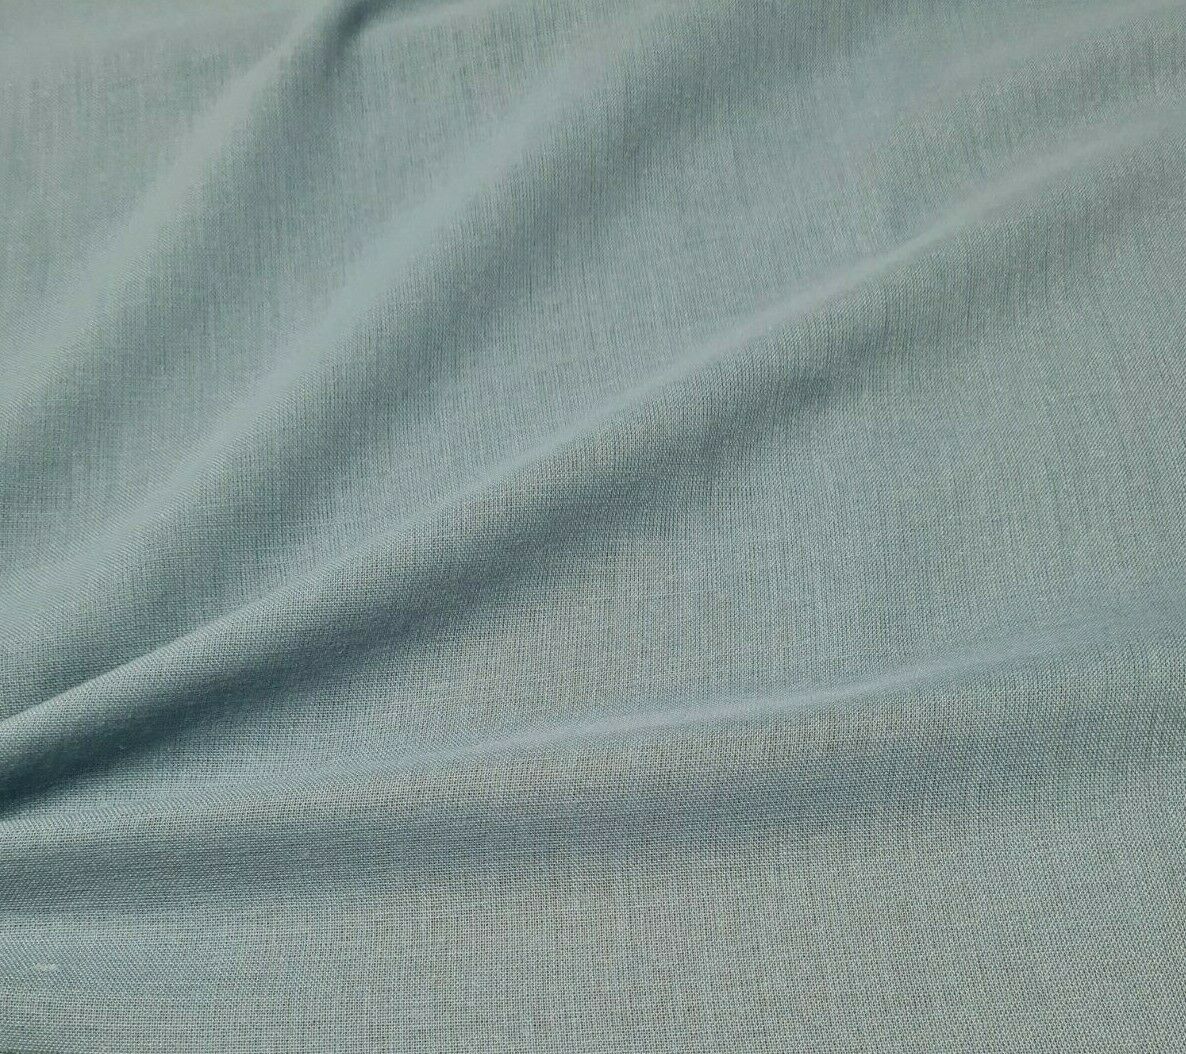 FABRIC POLYESTER WOOL BLEND PASTEL BLUE COLOUR - SOLD BY THE METRE